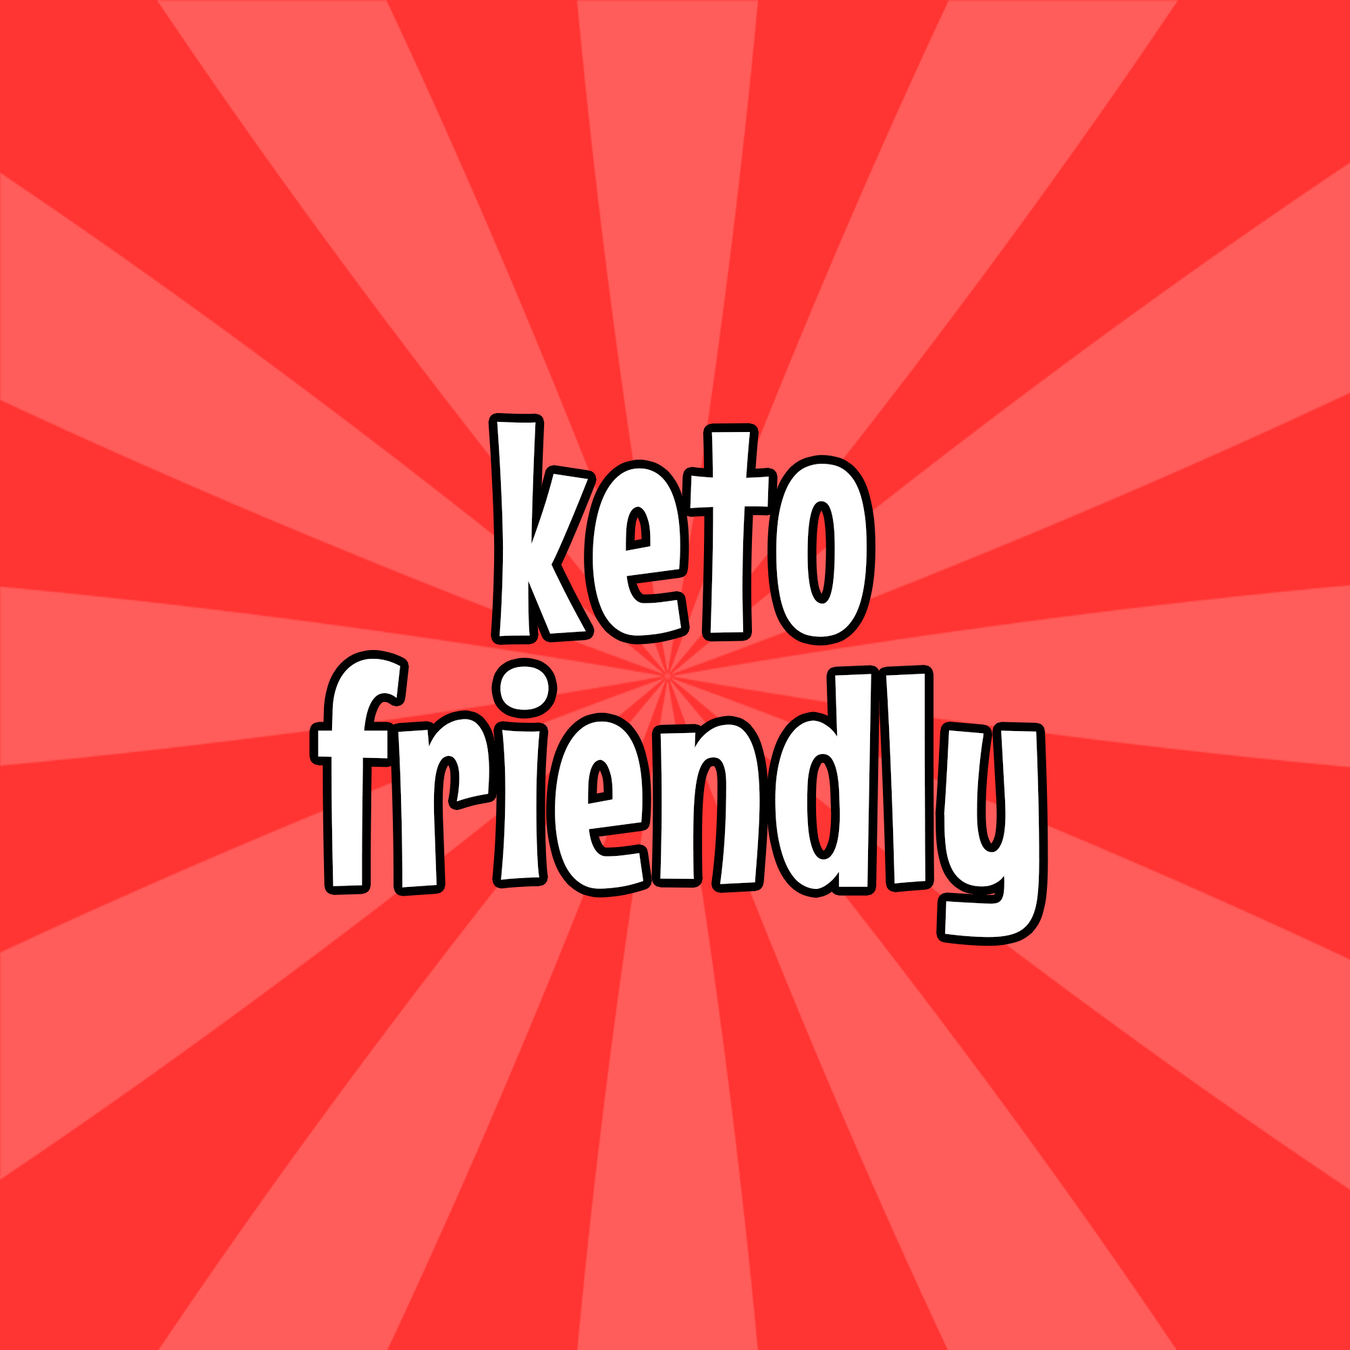 KETO-friendly, Sugarfree, Glutenfree, Diabetic, and Low Carb Products